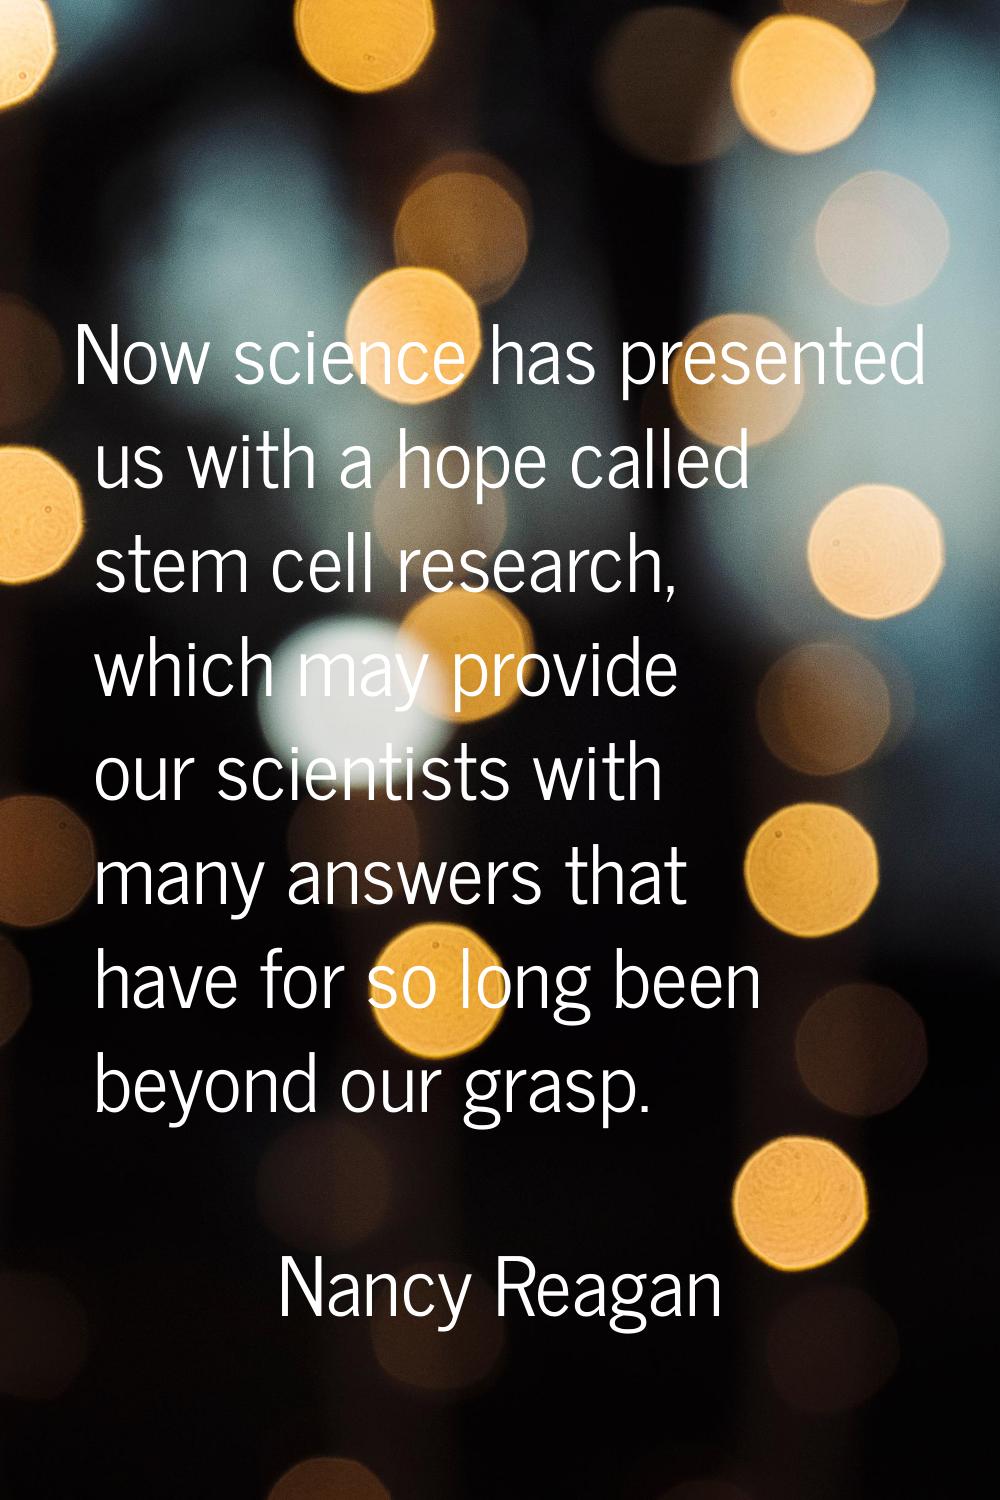 Now science has presented us with a hope called stem cell research, which may provide our scientist